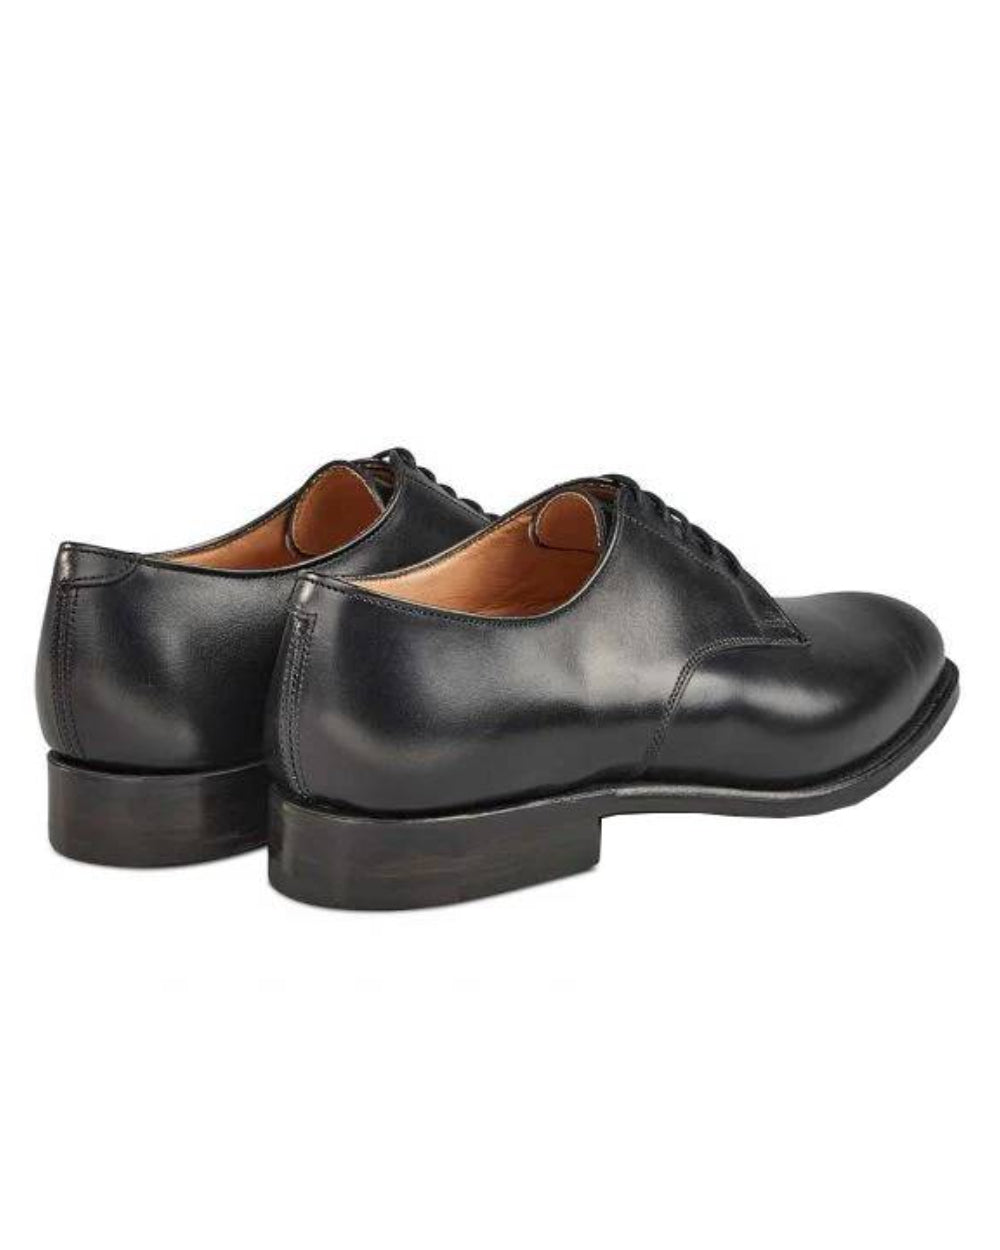 Black Coloured Trickers Wiltshire Plain Derby City Shoe On A White Background 